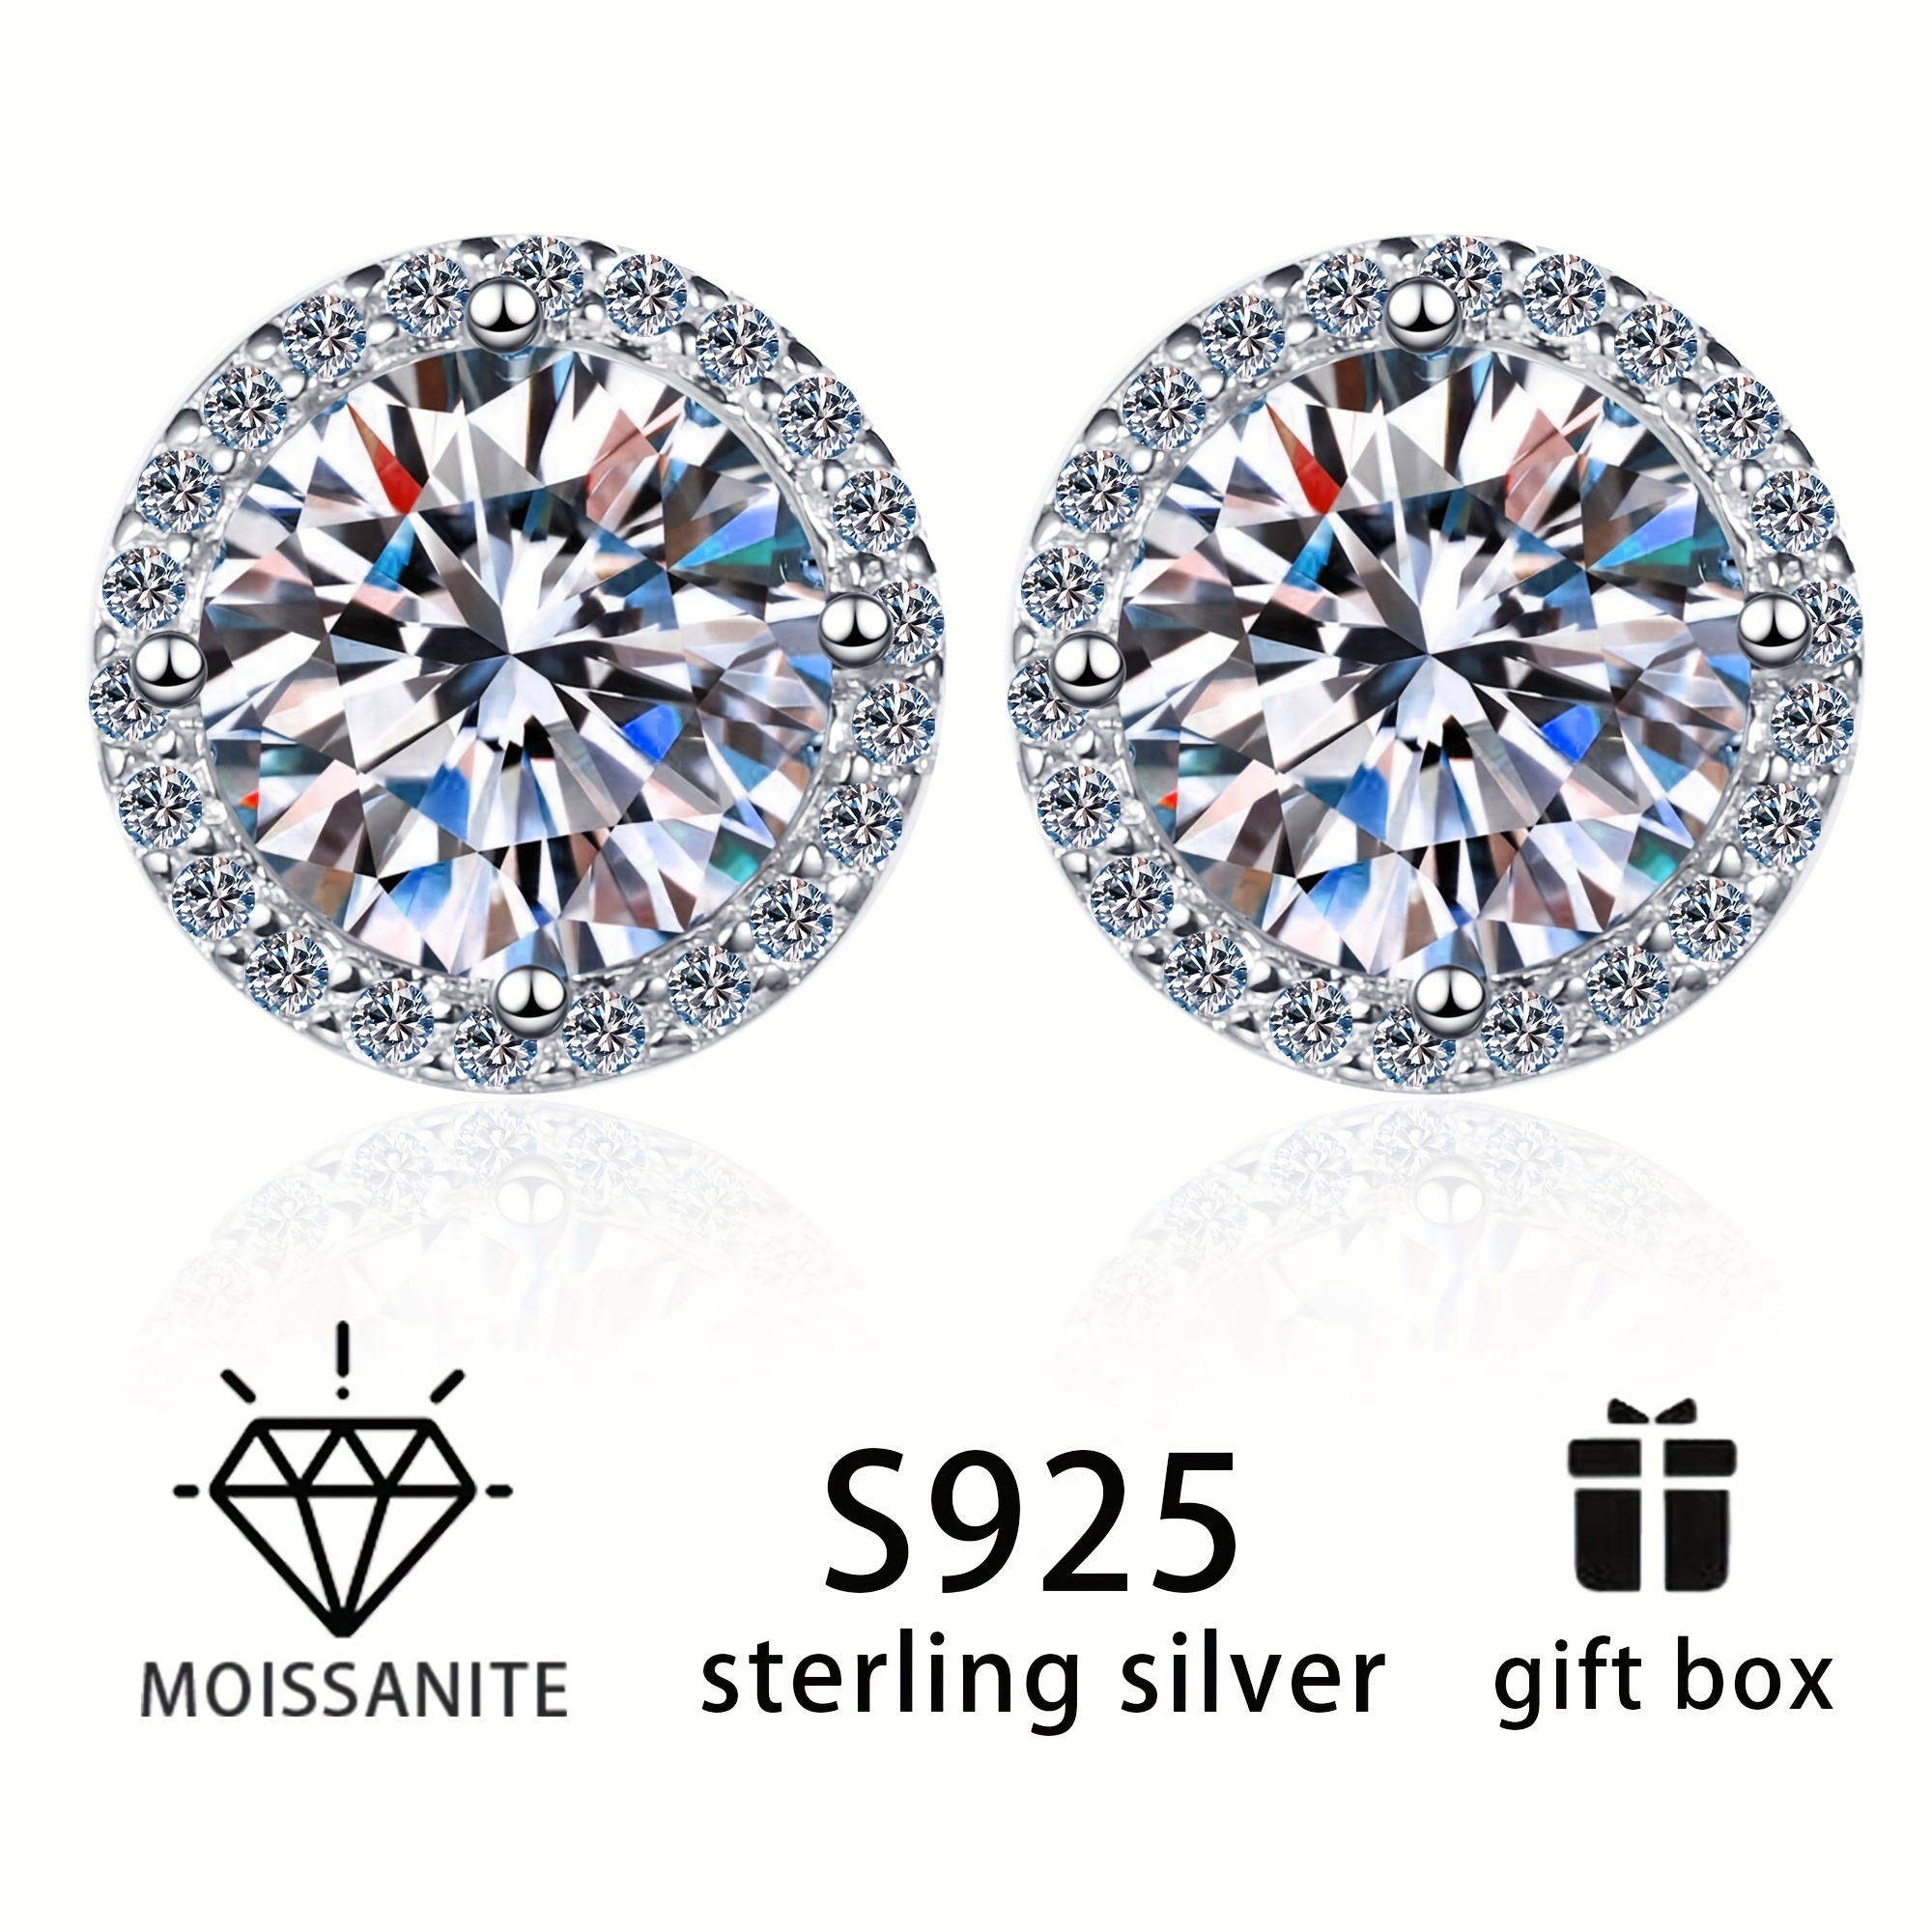 

Exquisite Stud Earrings 925 Sterling Silver Hypoallergenic Jewelry Sparkling Moissanite Inlaid Fashion Trend Design, Trendy Female Gift